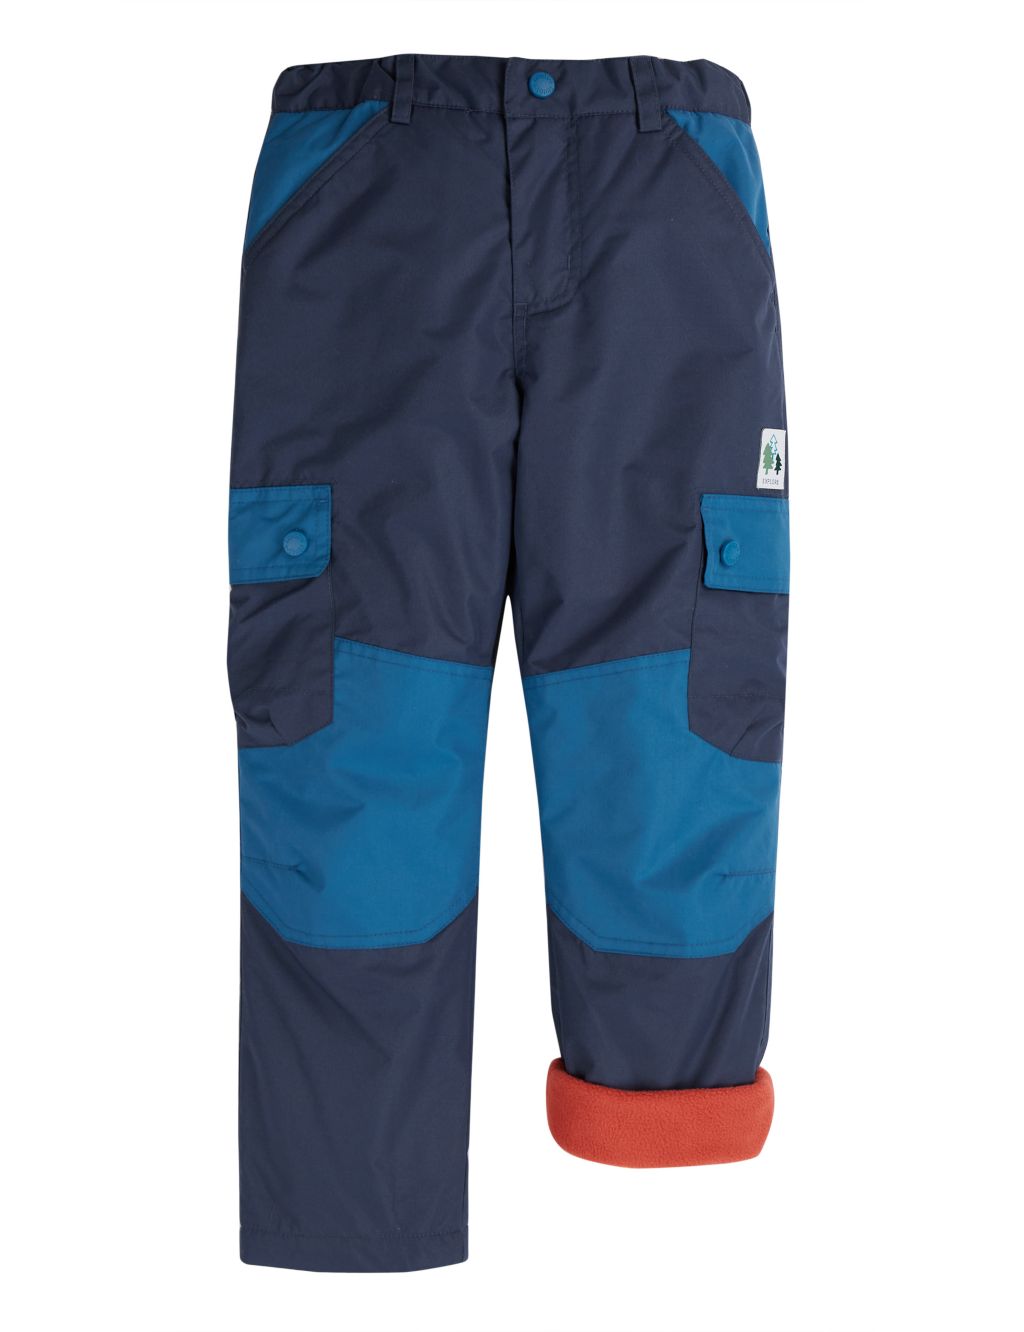 Expedition Trousers (18 Mths - 10 Yrs) image 1